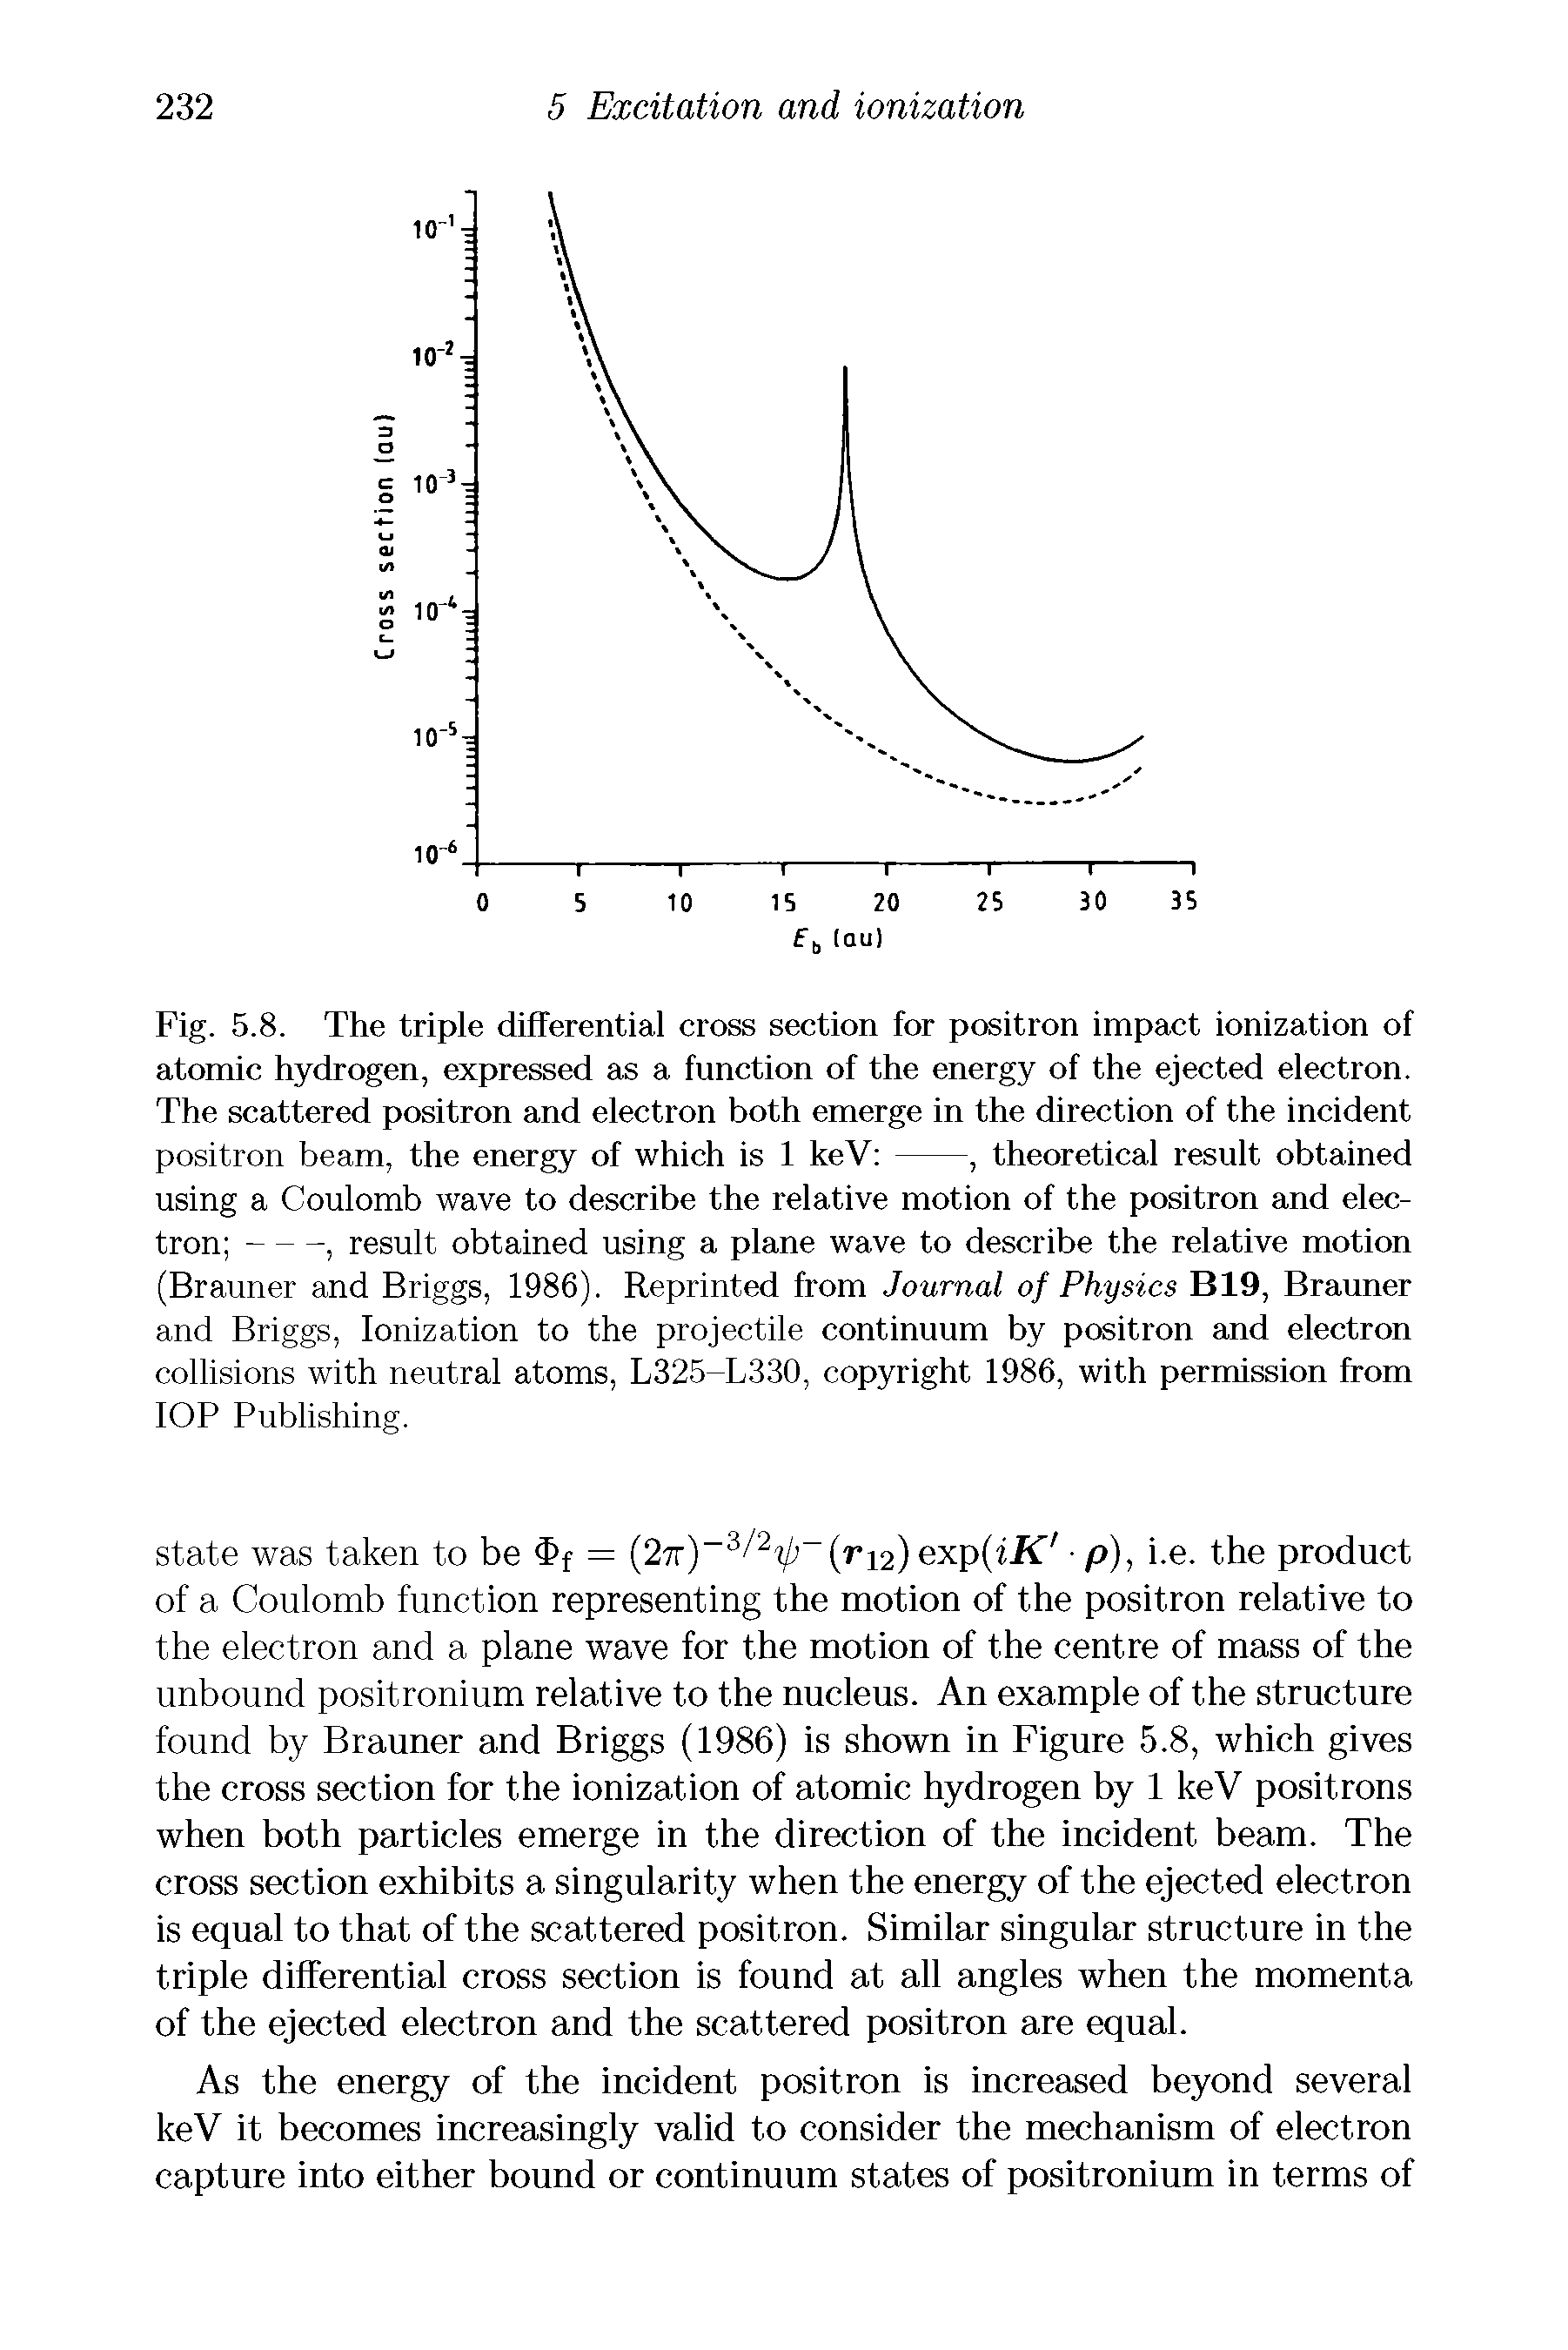 Fig. 5.8. The triple differential cross section for positron impact ionization of atomic hydrogen, expressed as a function of the energy of the ejected electron. The scattered positron and electron both emerge in the direction of the incident...